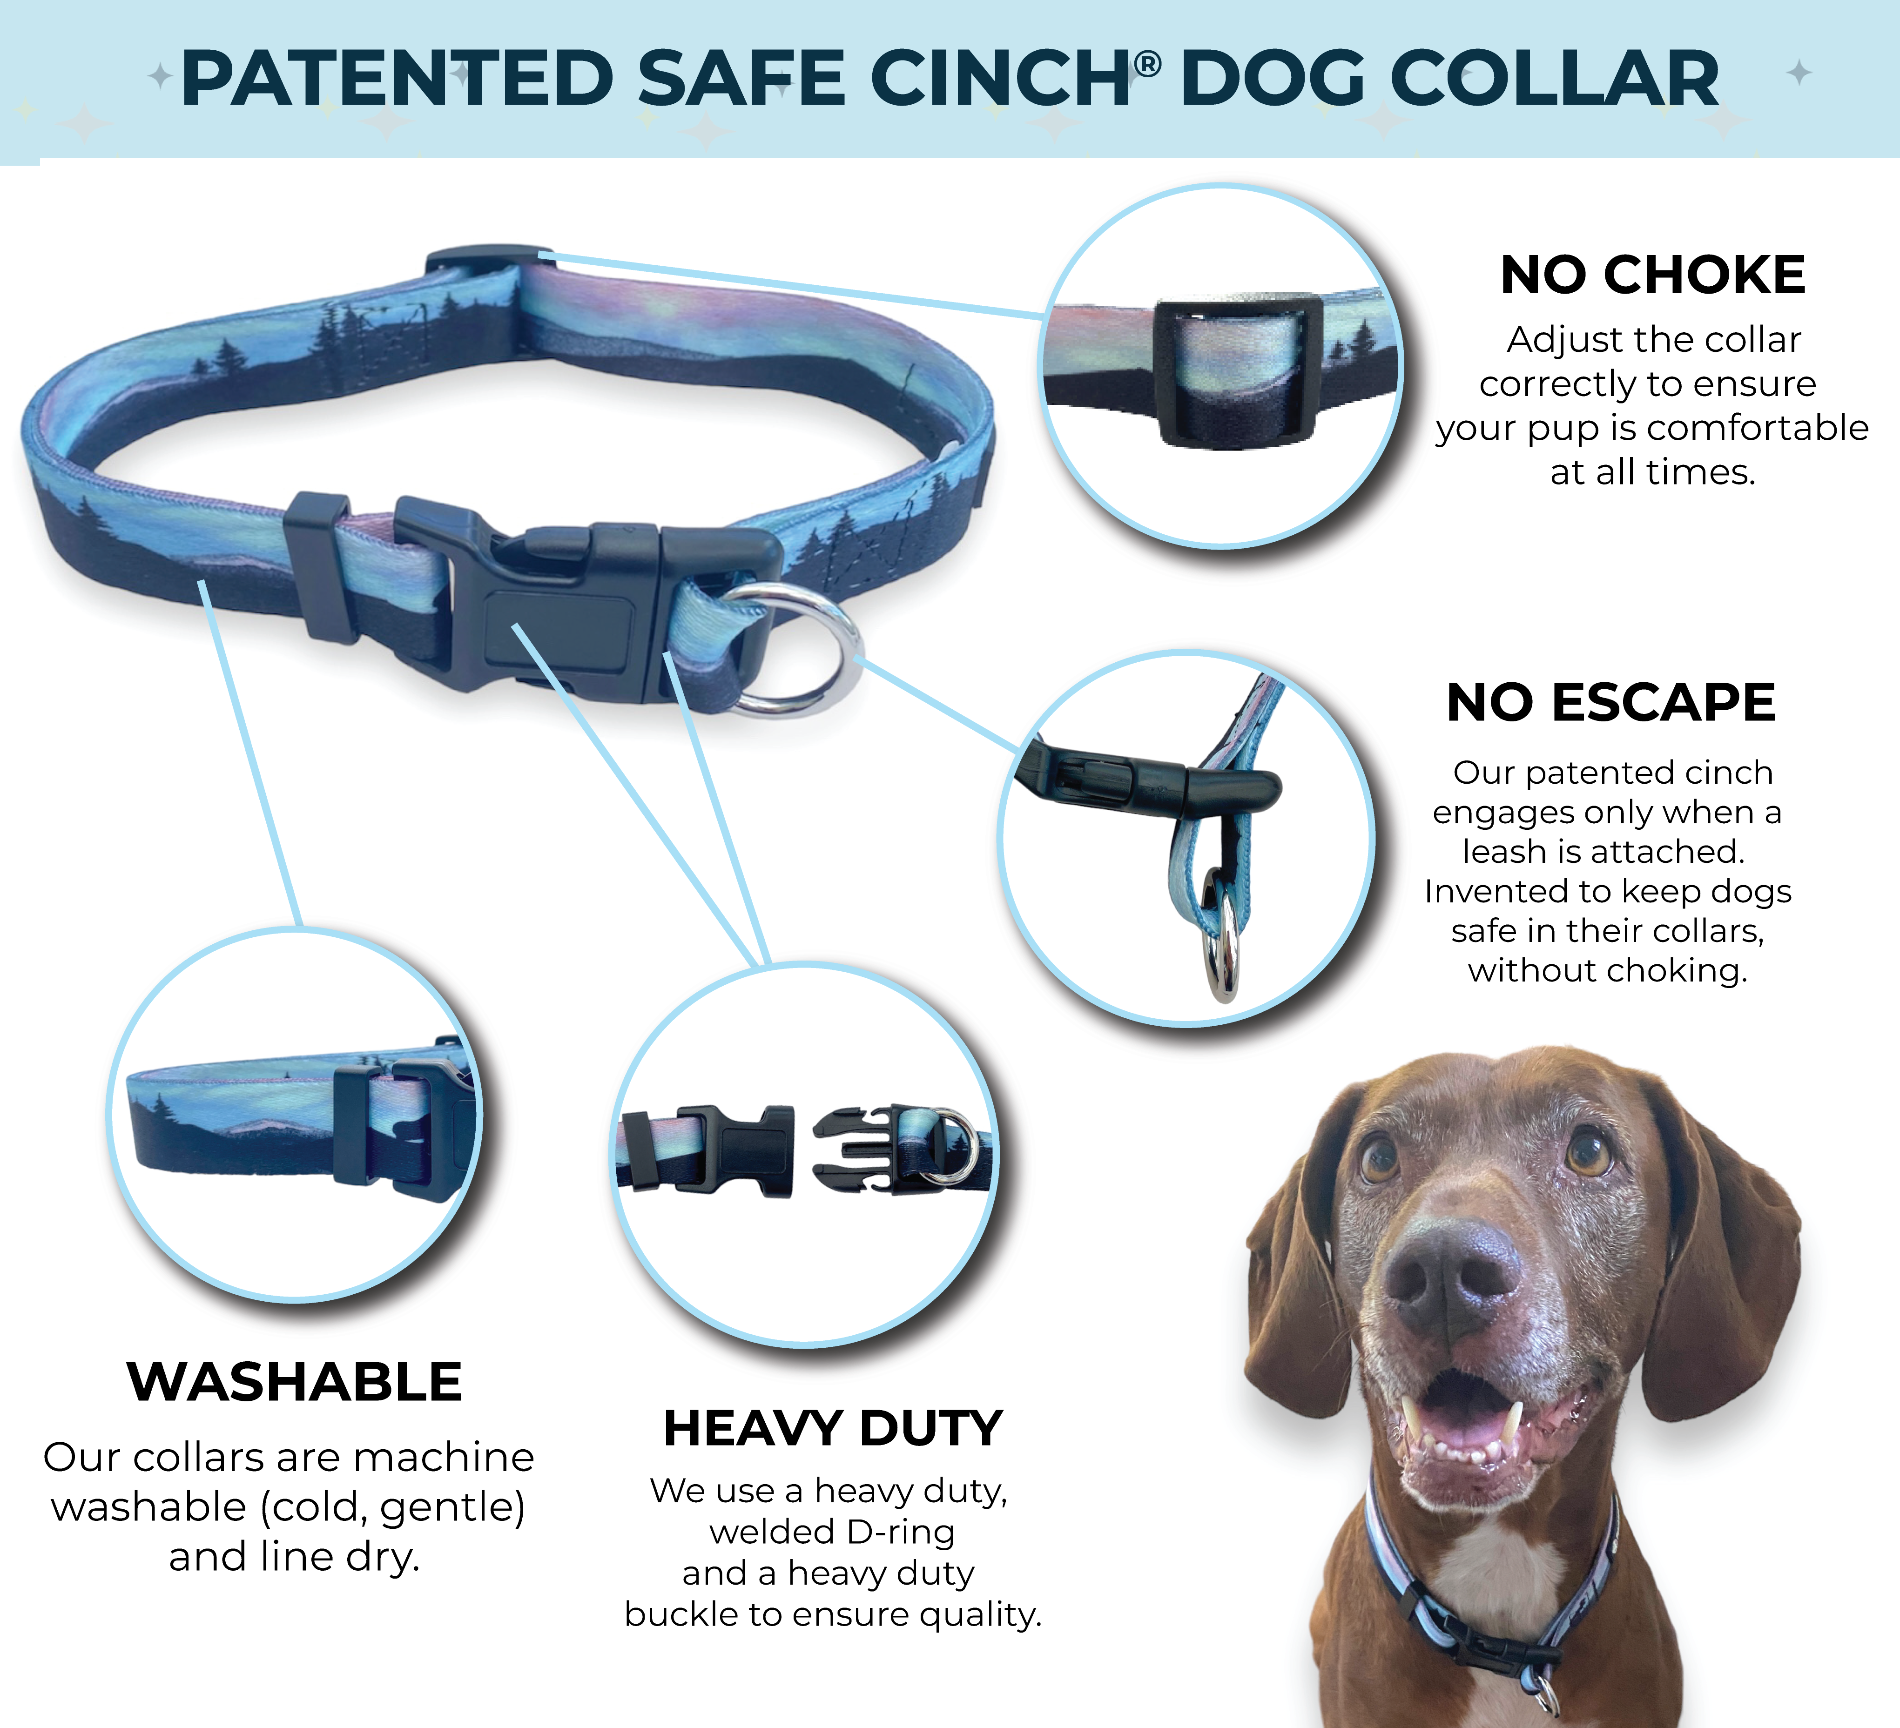 an infographic for a safe cinch northern lights dog collar by fearless pet